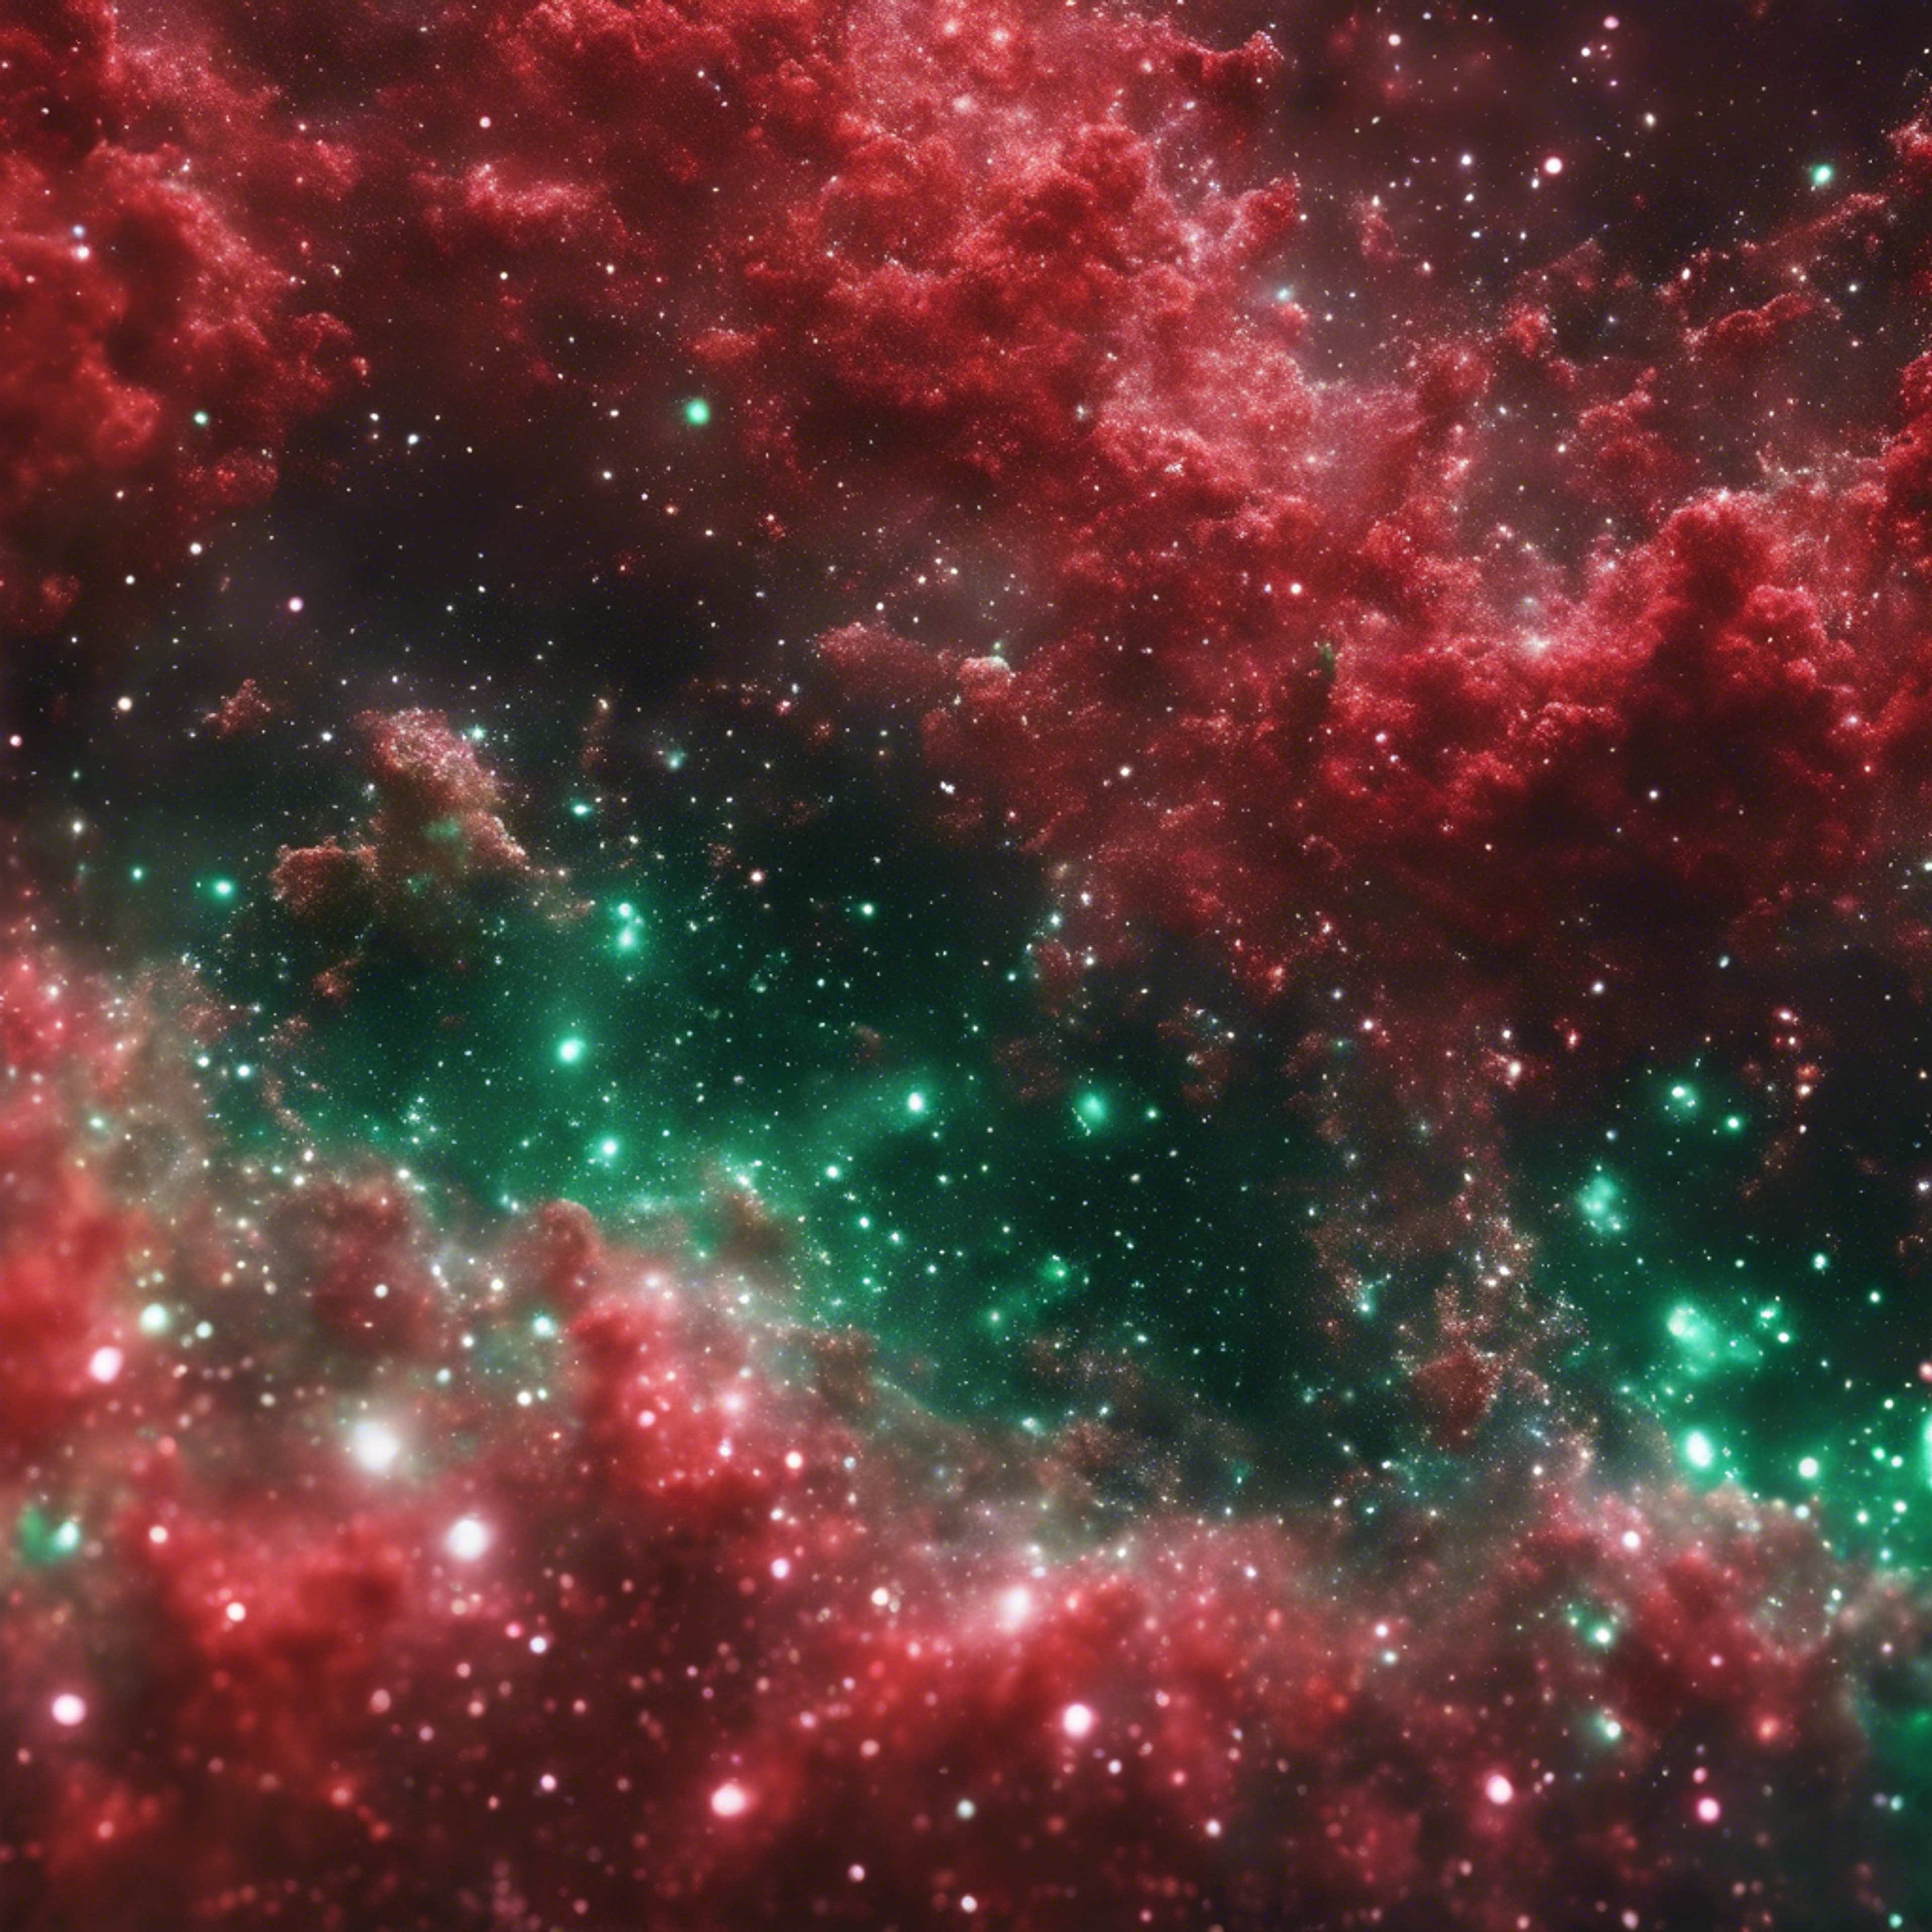 Red and green glitter spread like a nebula in space Wallpaper[56bea9c0023d4b1f9afc]